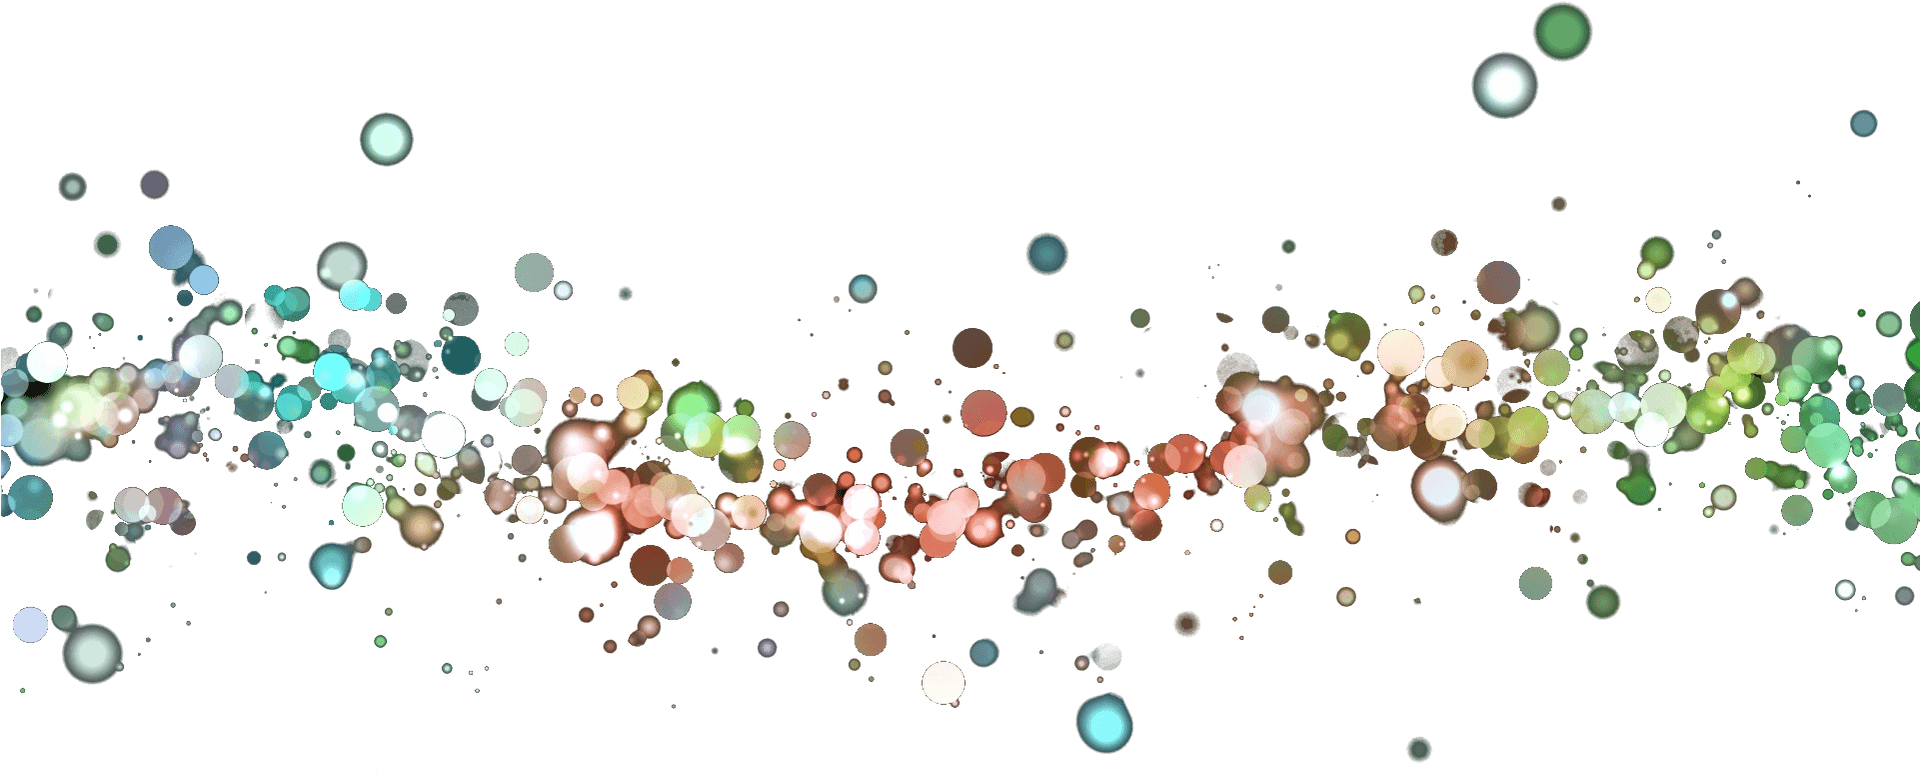 Abstract Underwater Bubble Trail.jpg PNG